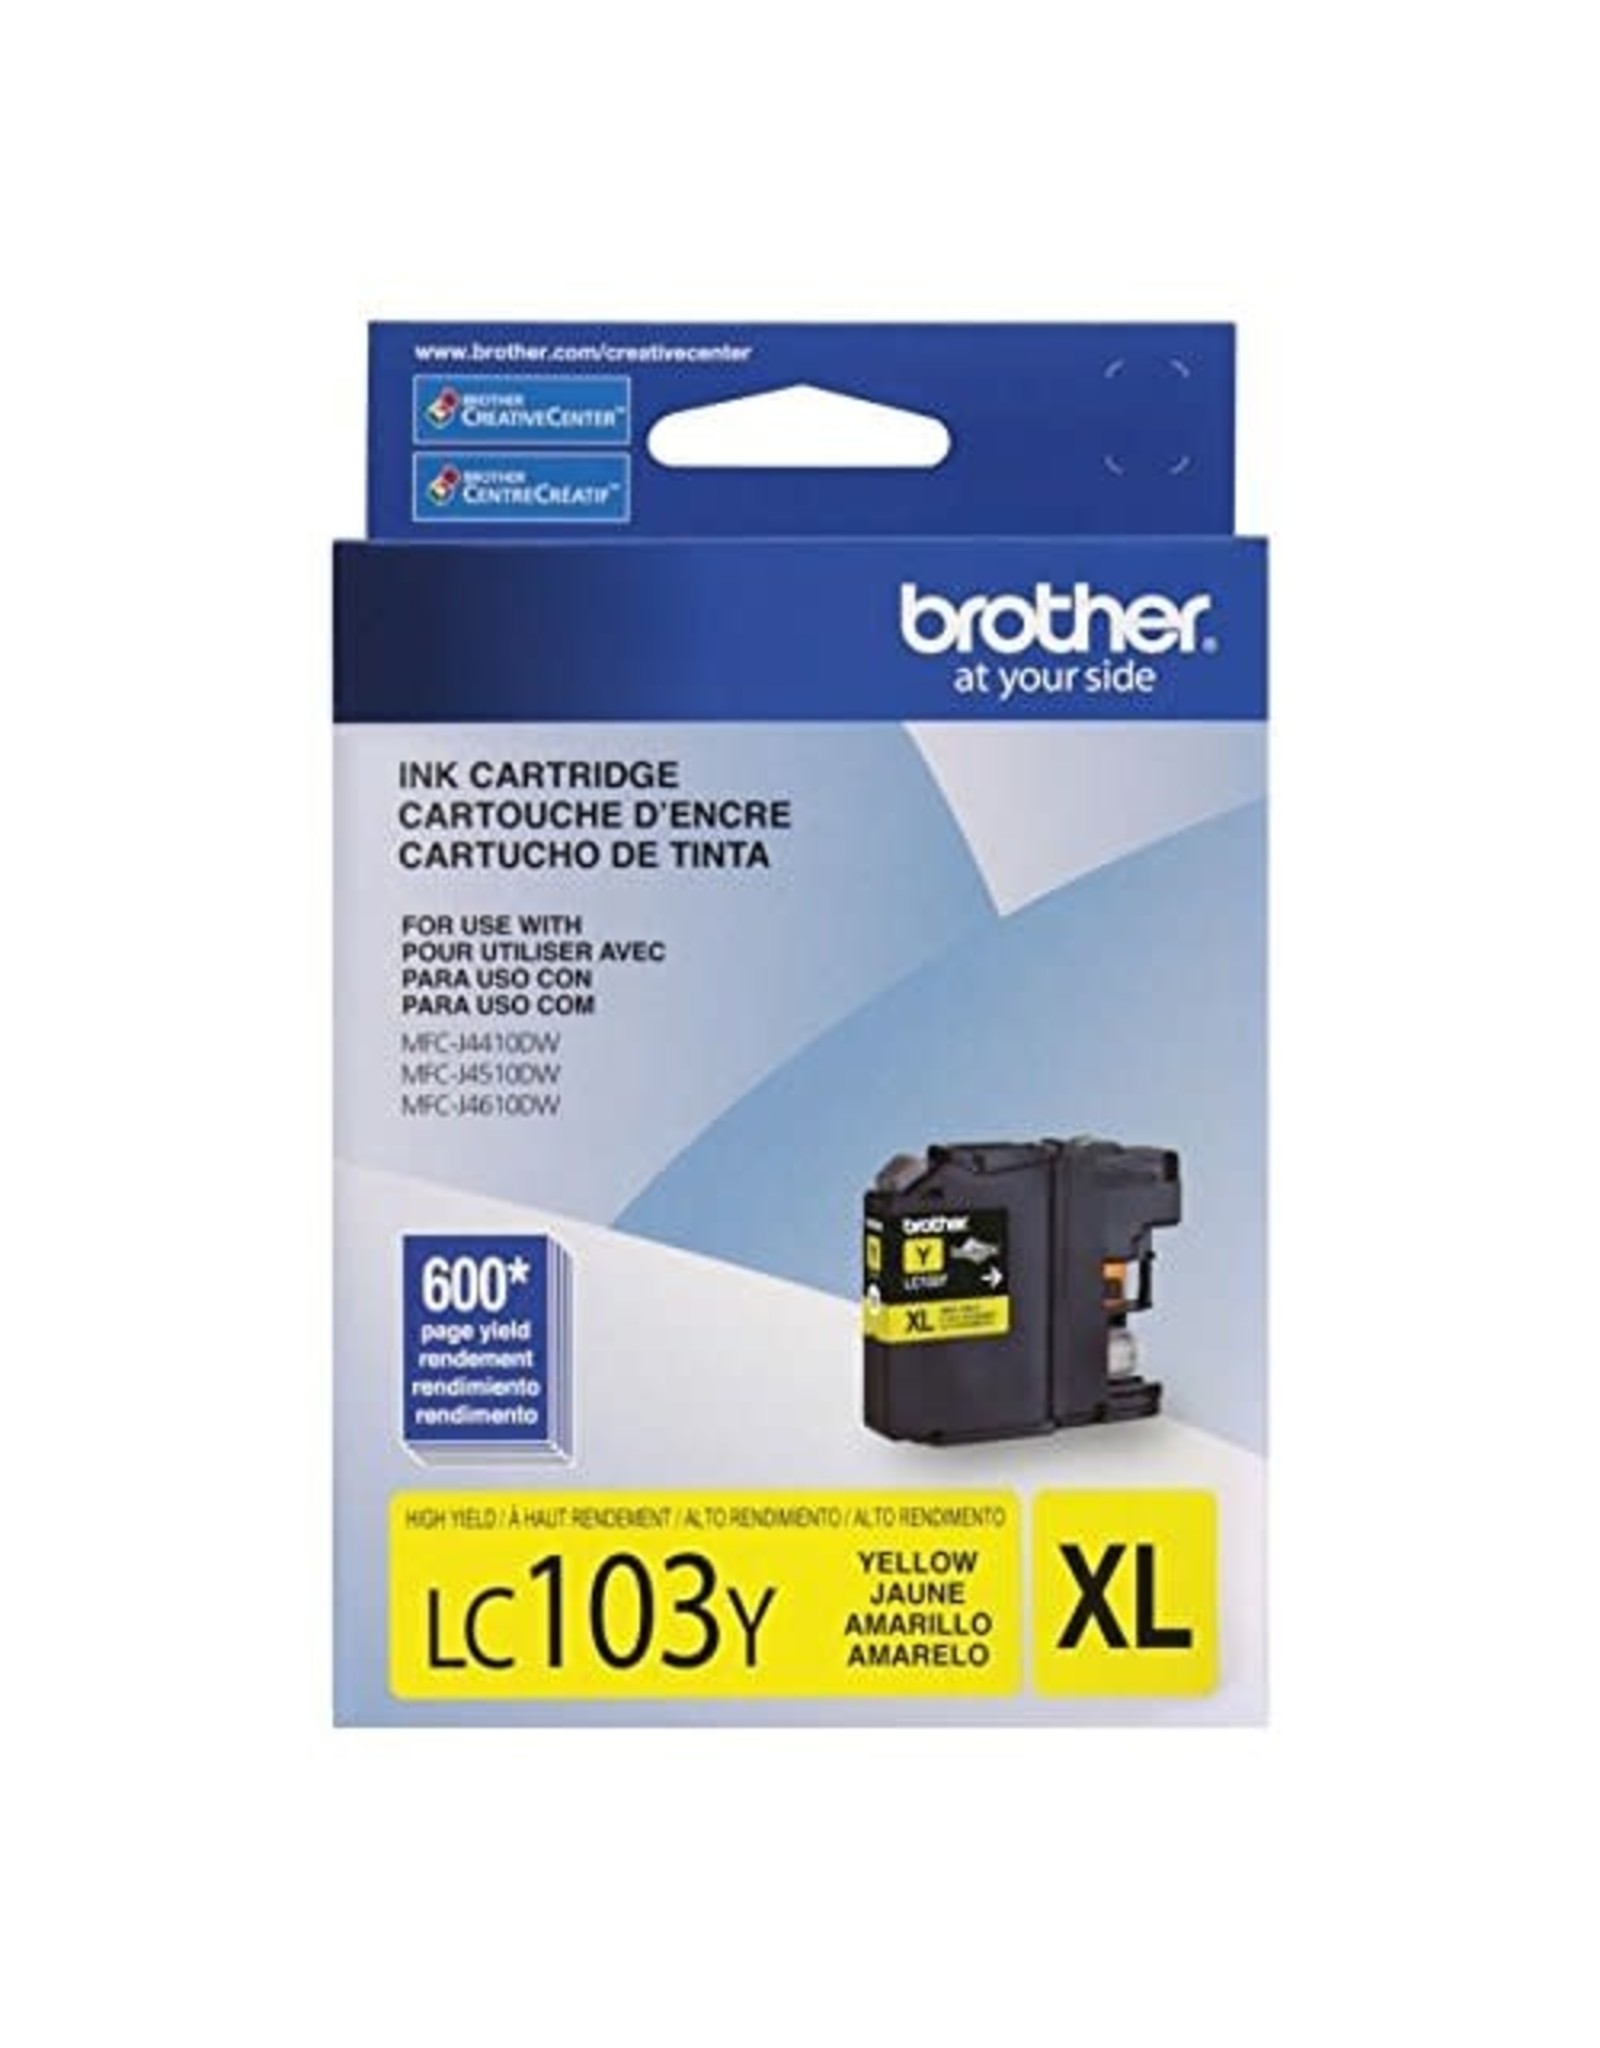 Brother INKJET CARTRIDGE-BROTHER 103 YELLOW HIGH YIELD